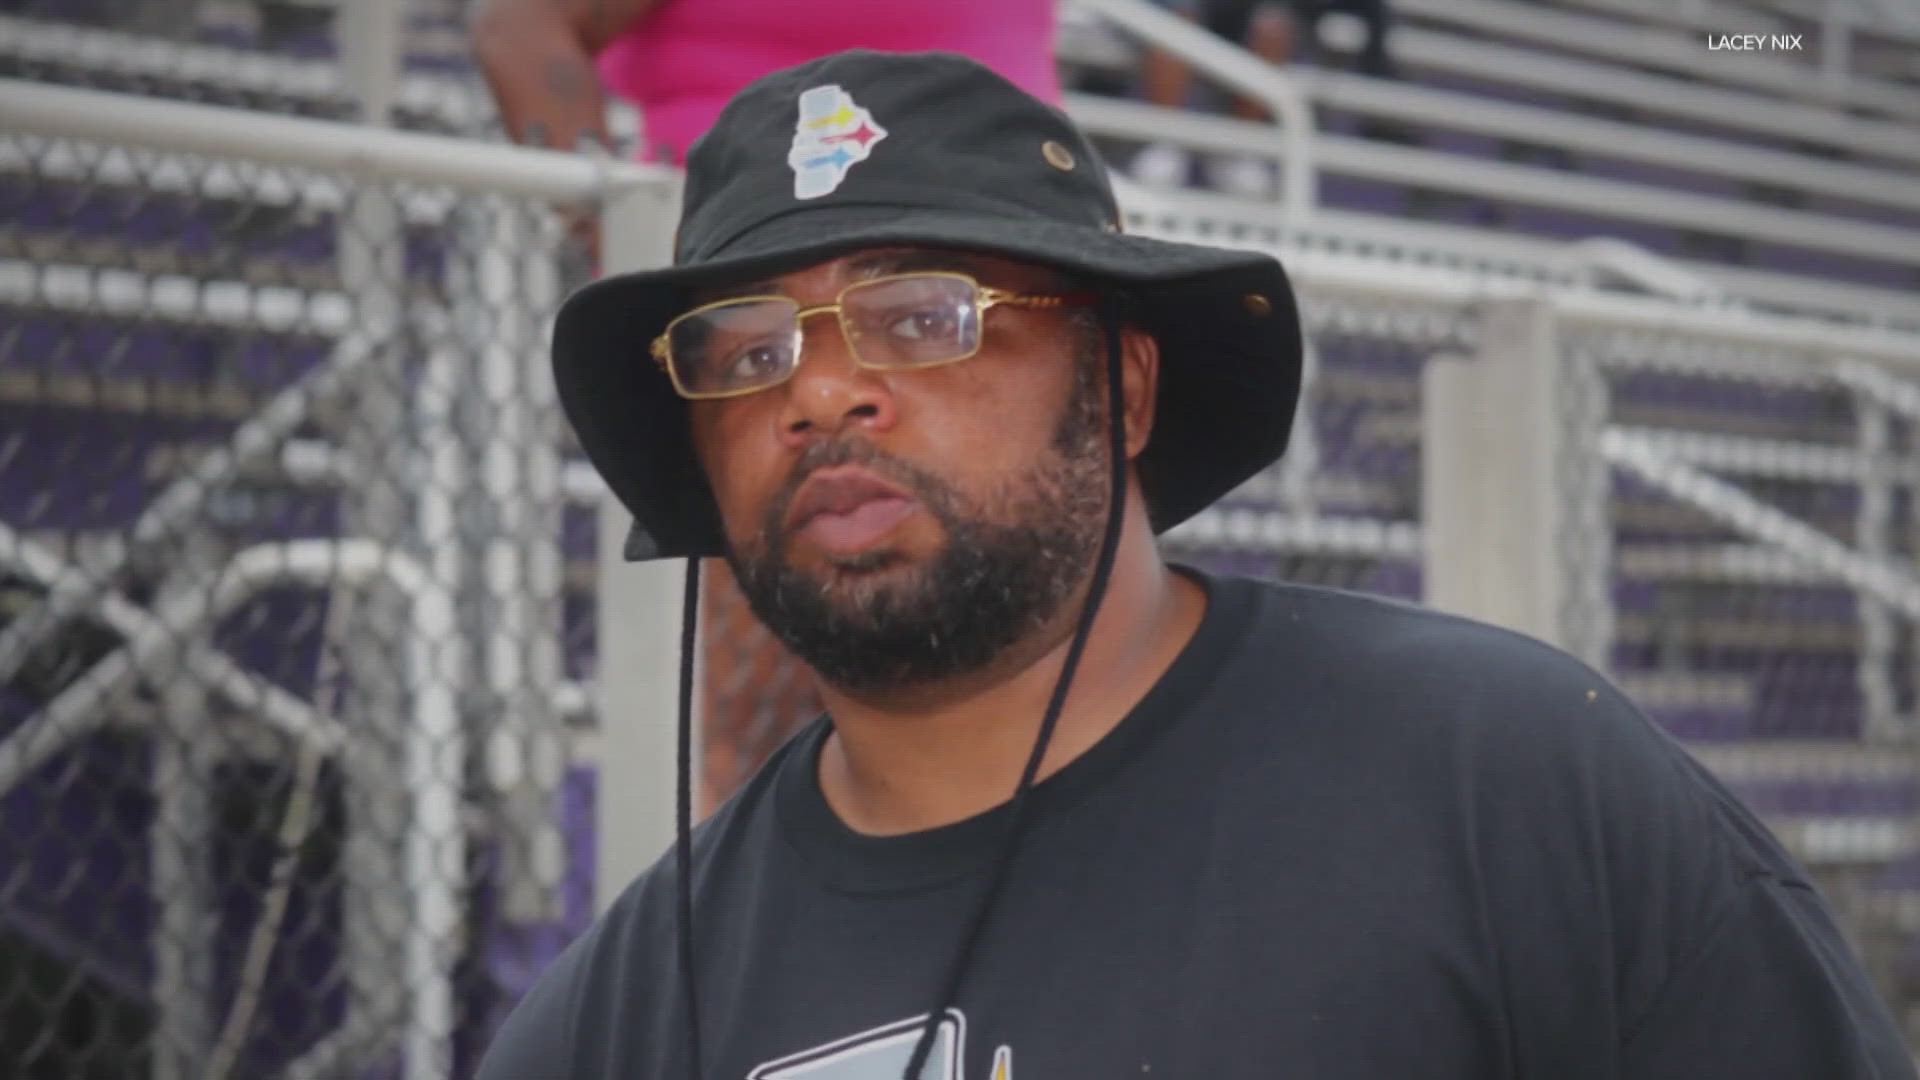 Beloved youth football coach Coach Nell was killed in a road rage shooting.